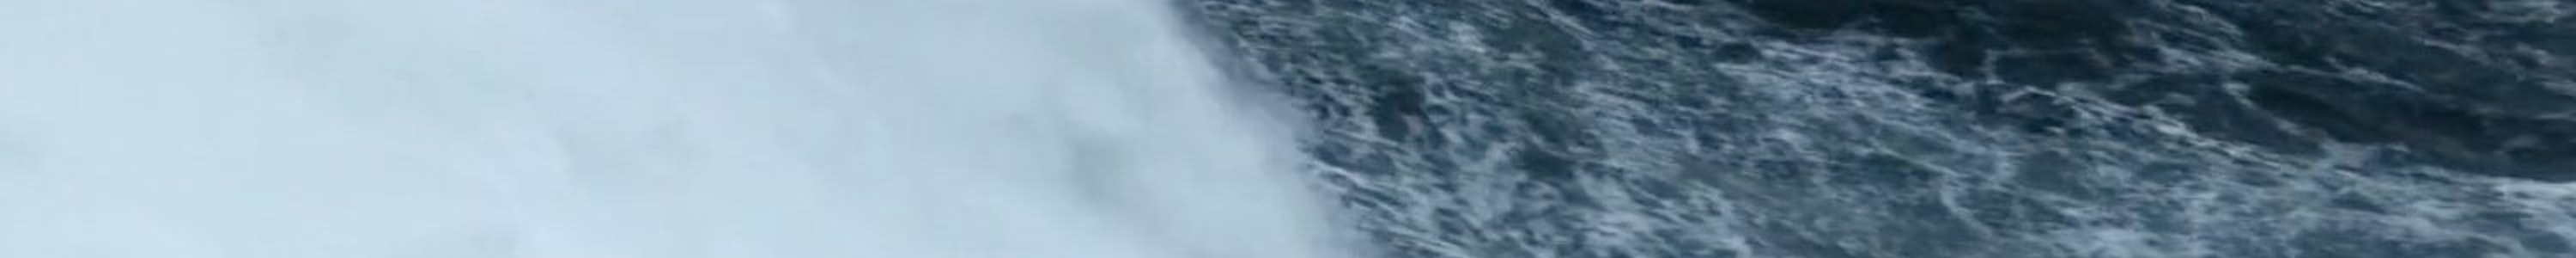 A still from Alex Monteith’s video work shows a large wave breaking. The ocean is a dark blue and foamy white.